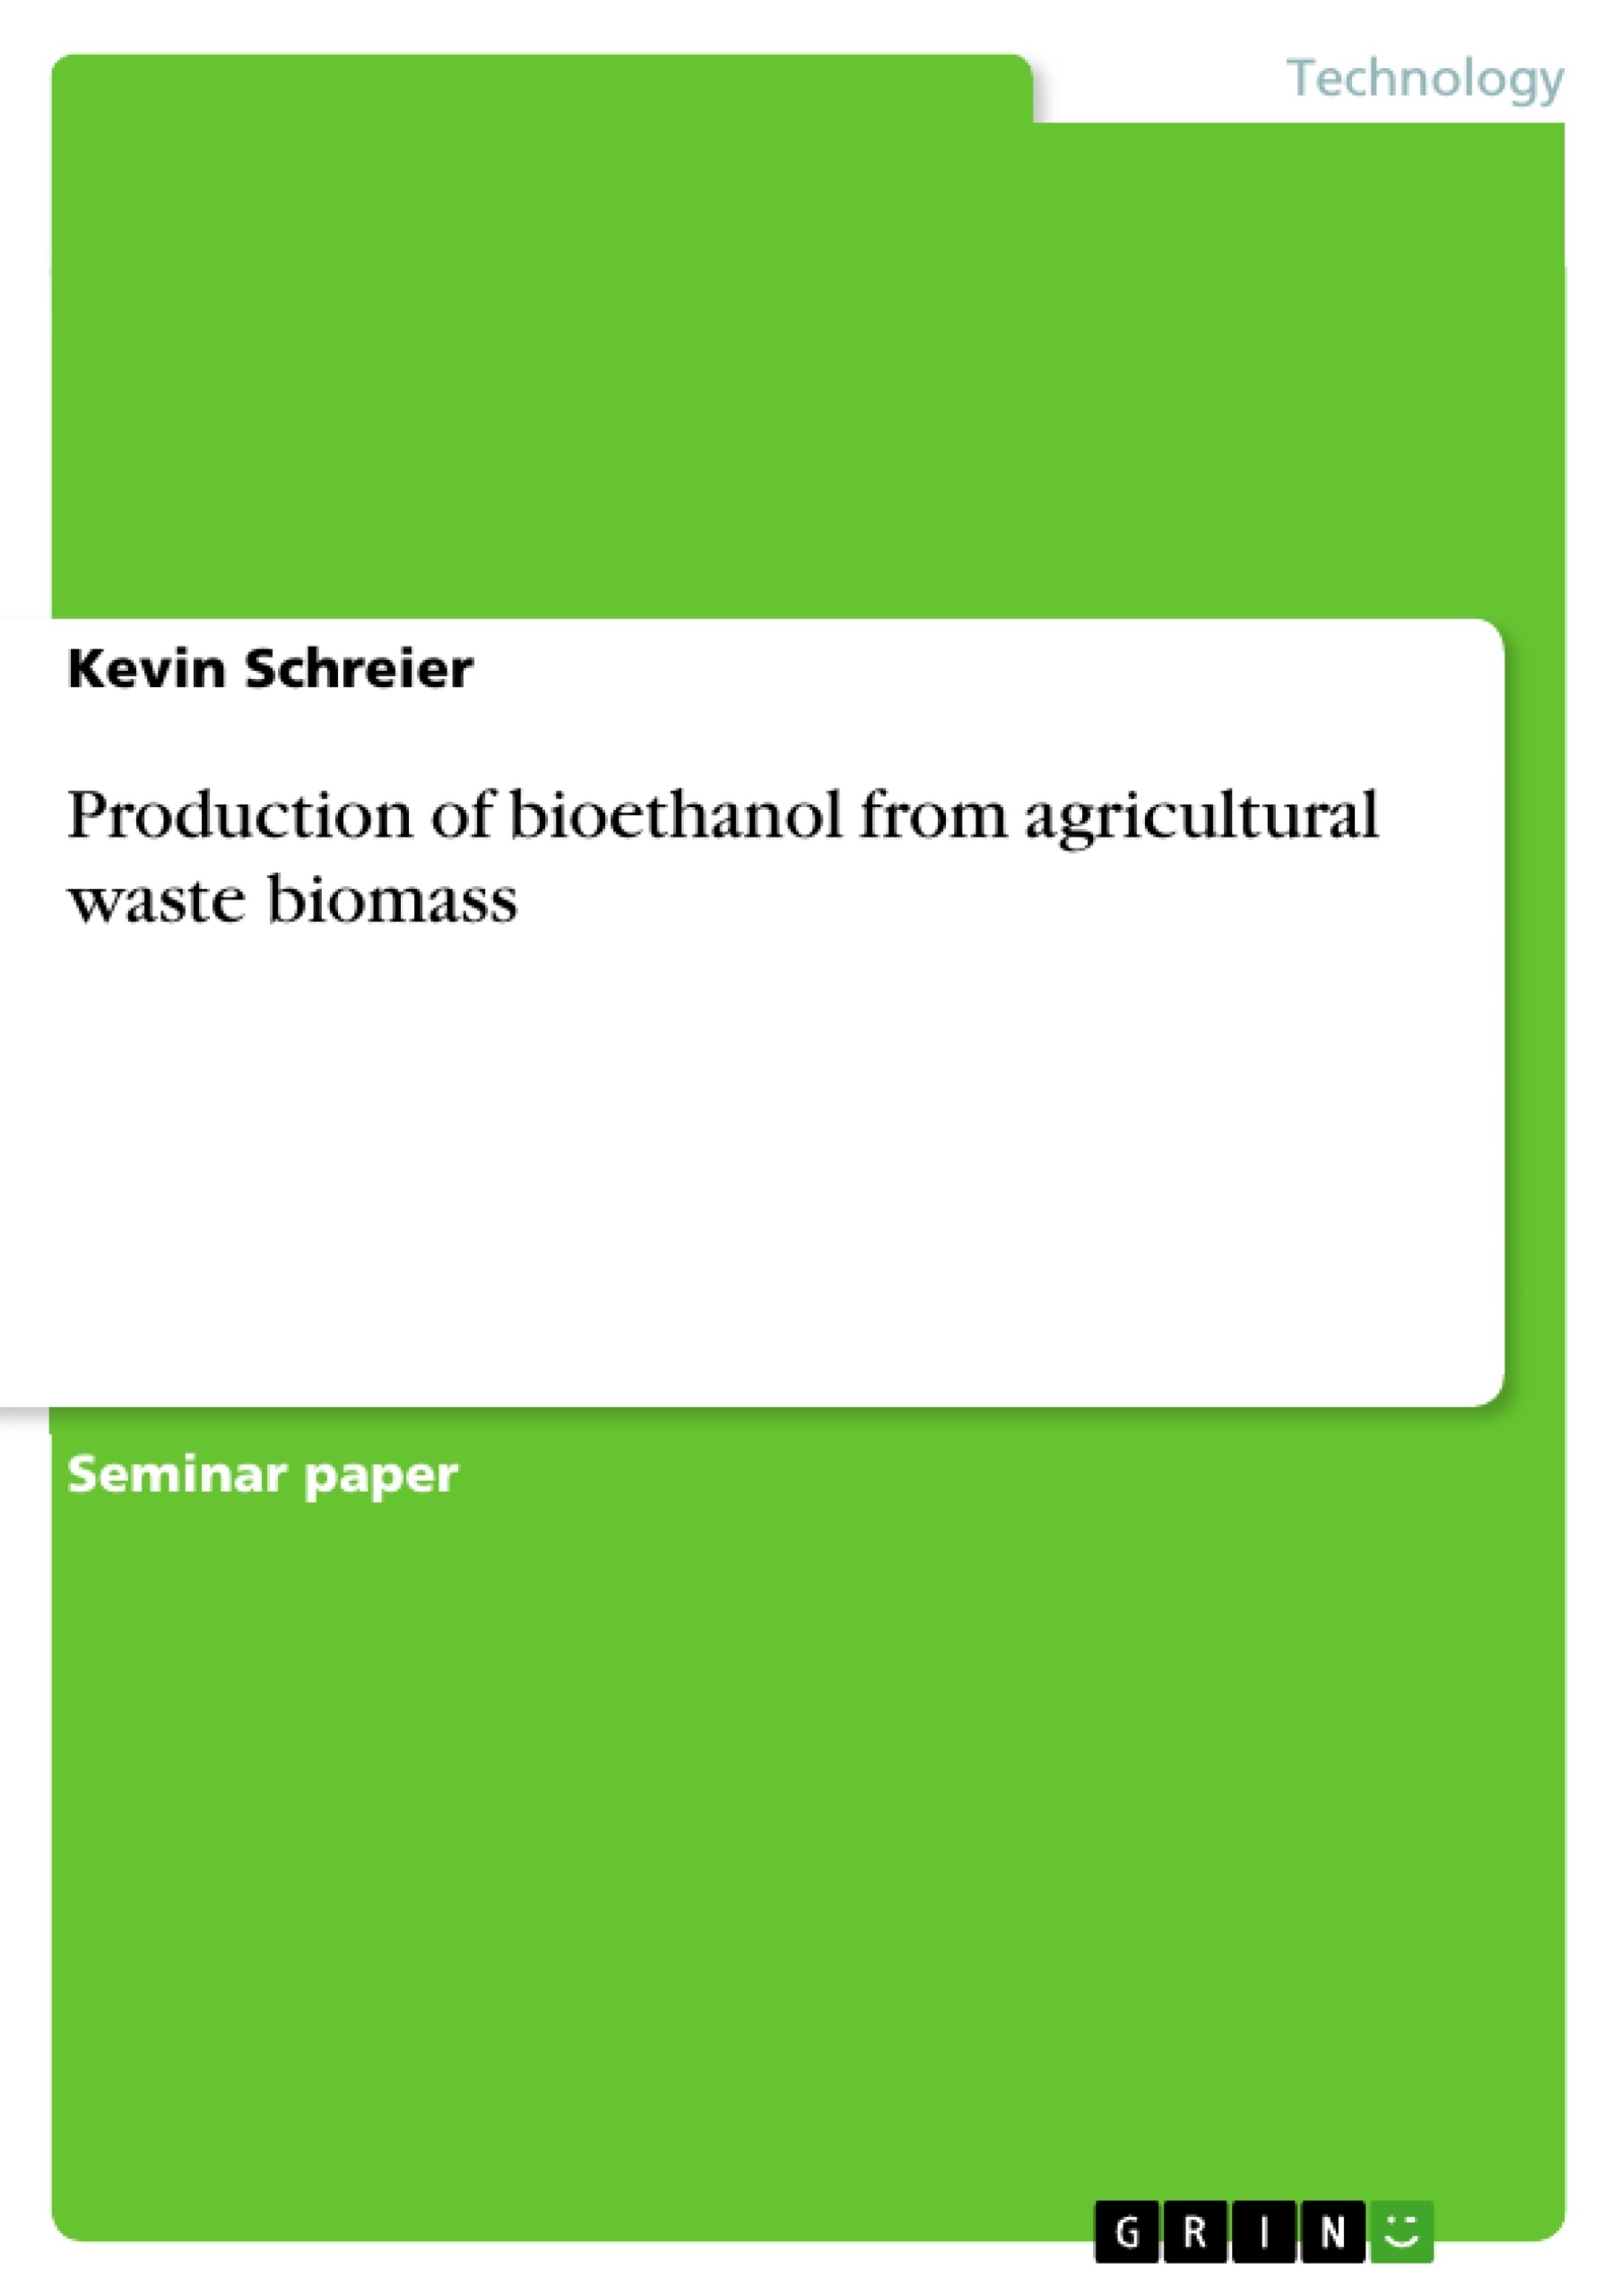 Title: Production of bioethanol from agricultural waste biomass